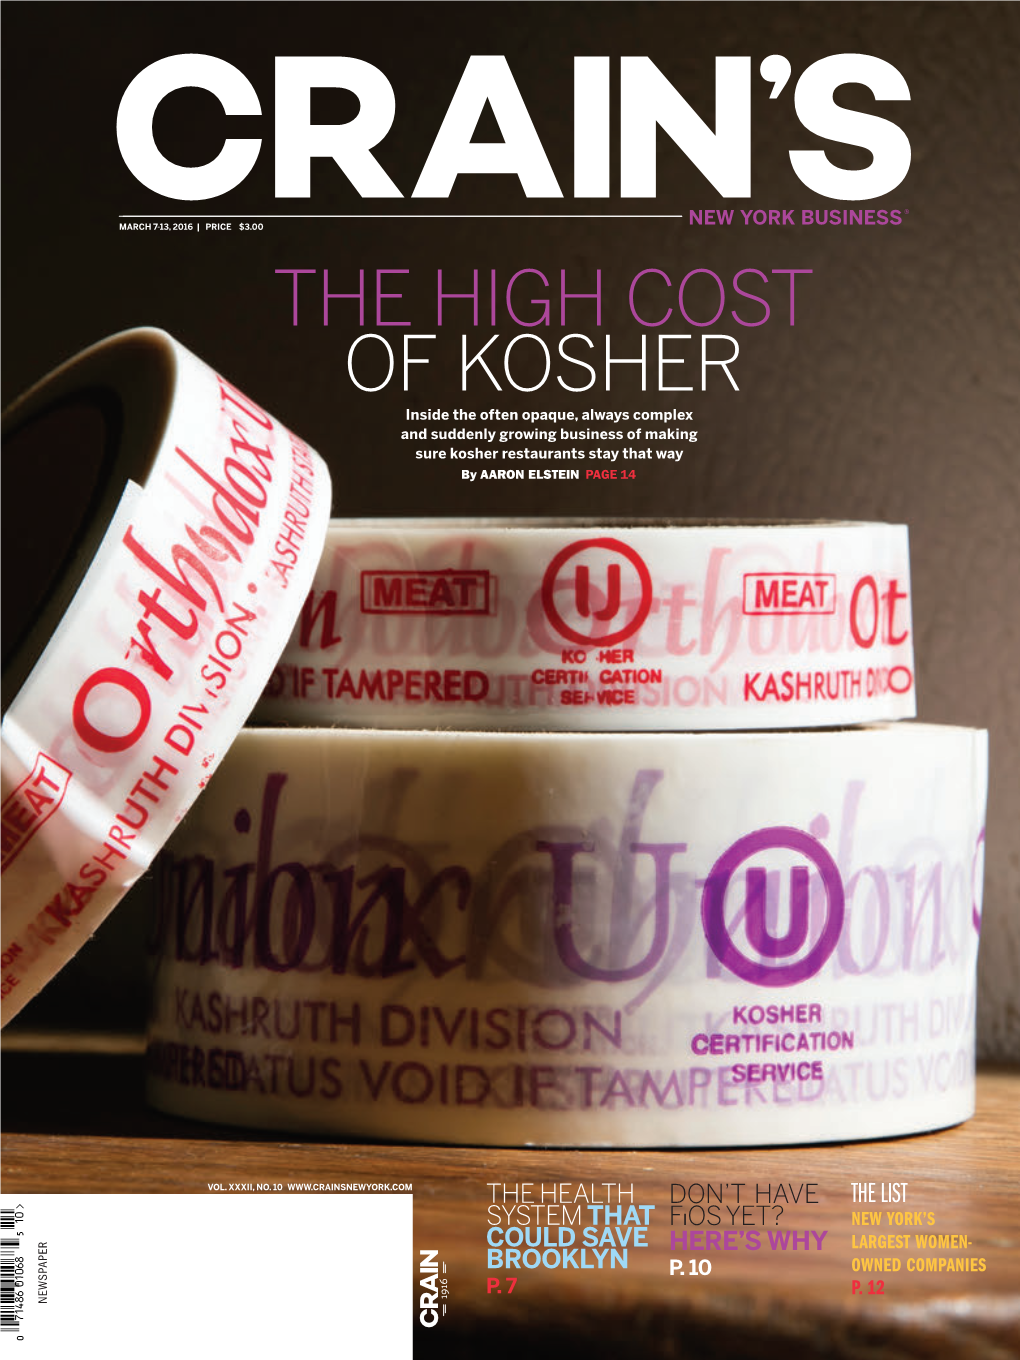 THE HIGH COST of KOSHER Inside the Often Opaque, Always Complex and Suddenly Growing Business of Making Sure Kosher Restaurants Stay That Way by AARON ELSTEIN PAGE 14